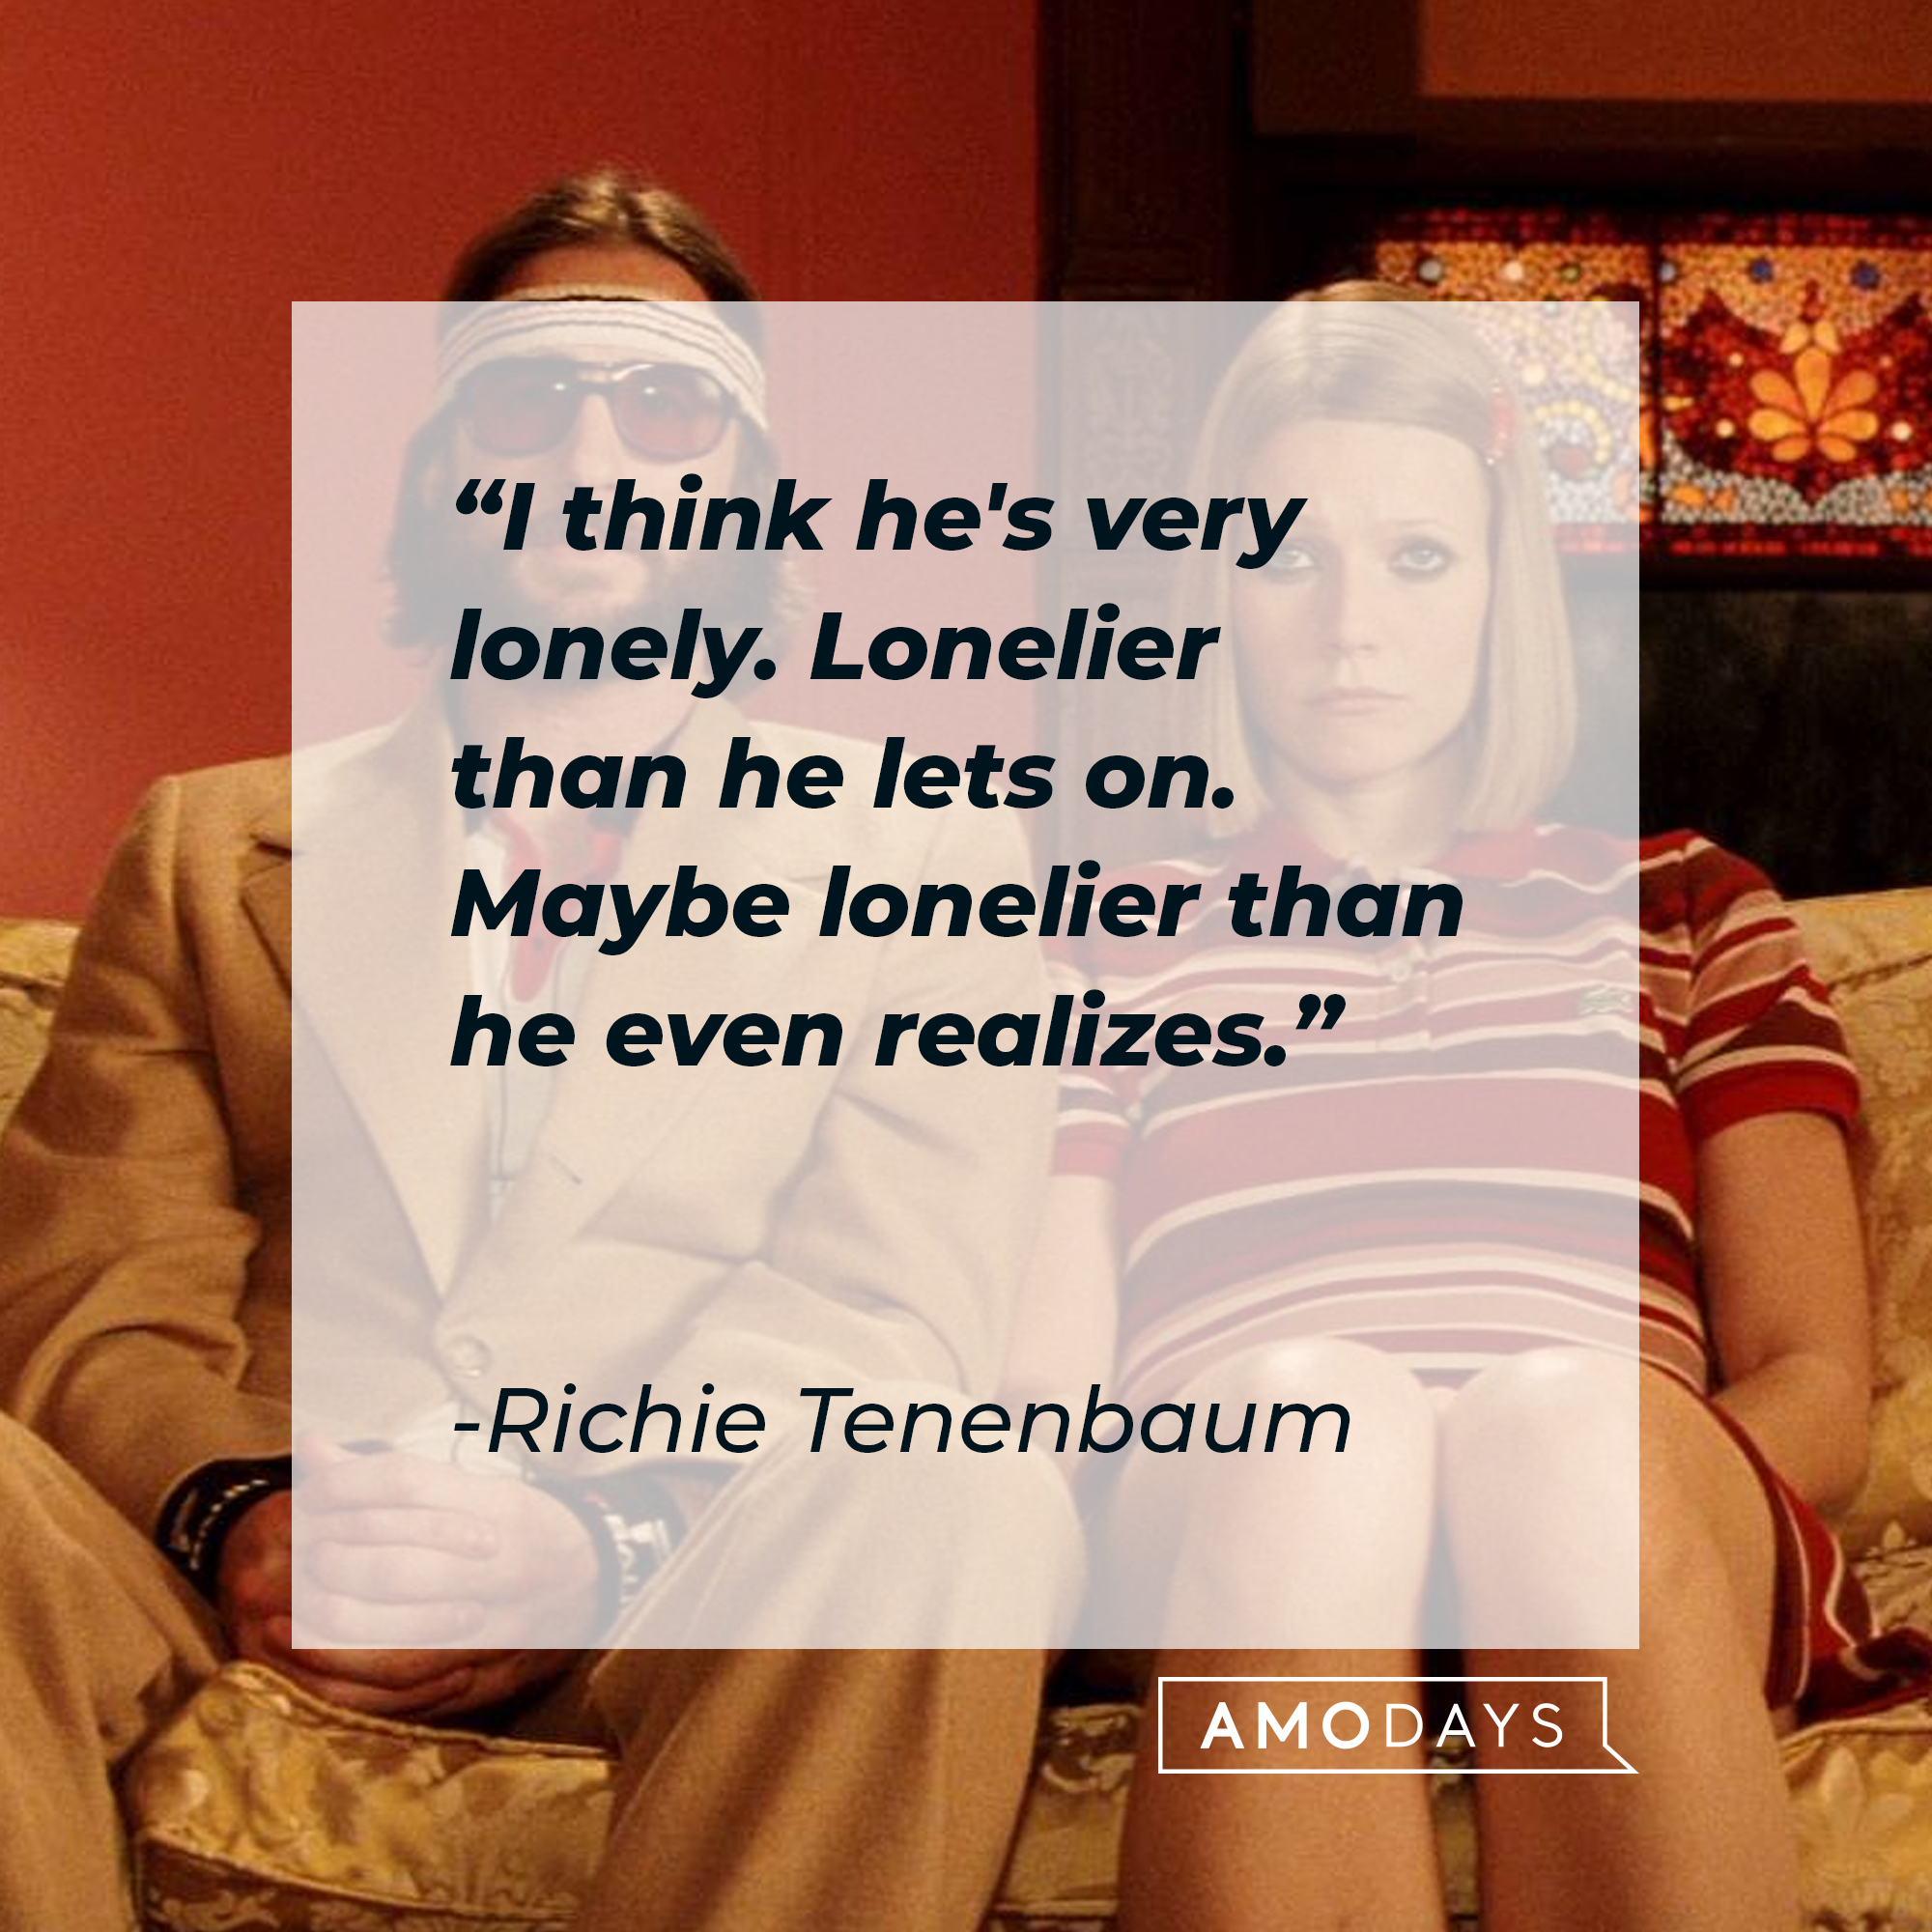 Richie Tenenbaum's quote: "I think he's very lonely. Lonelier than he lets on. Maybe lonelier than he even realizes." | Image: AmoDays